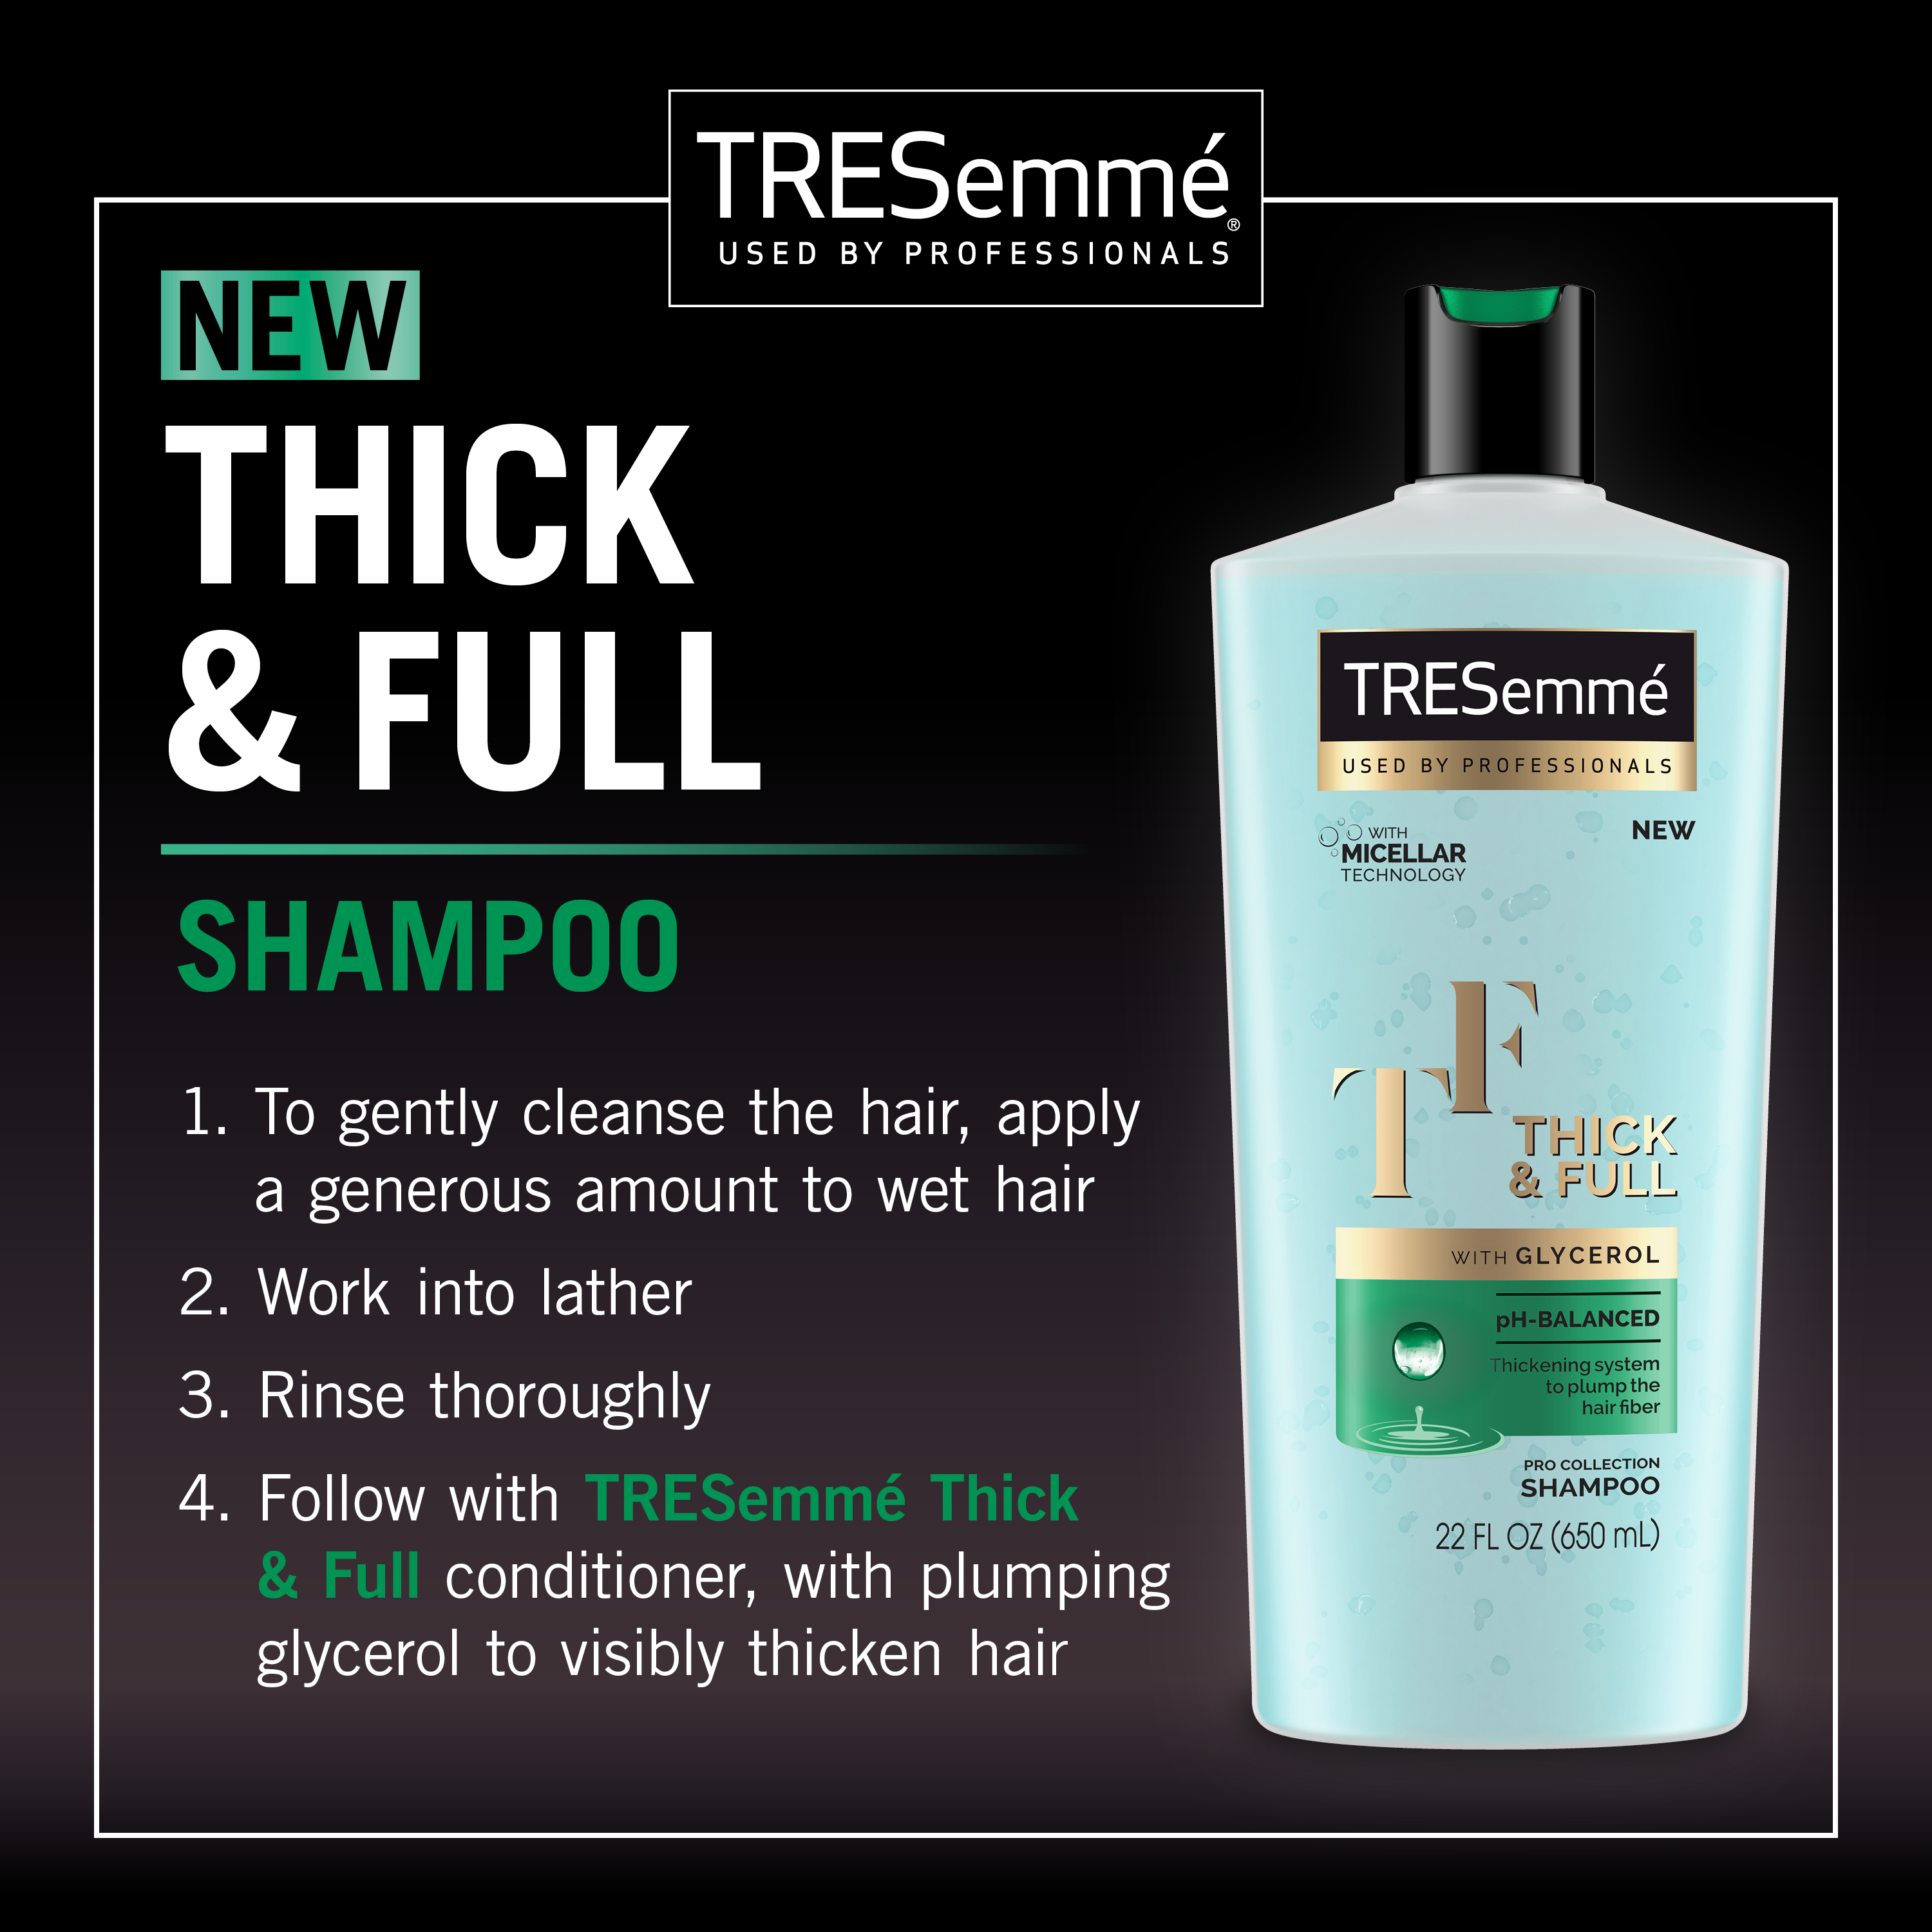 Tresemme Pro Collection Shampoo Thick and Full, 22 oz - image 4 of 9